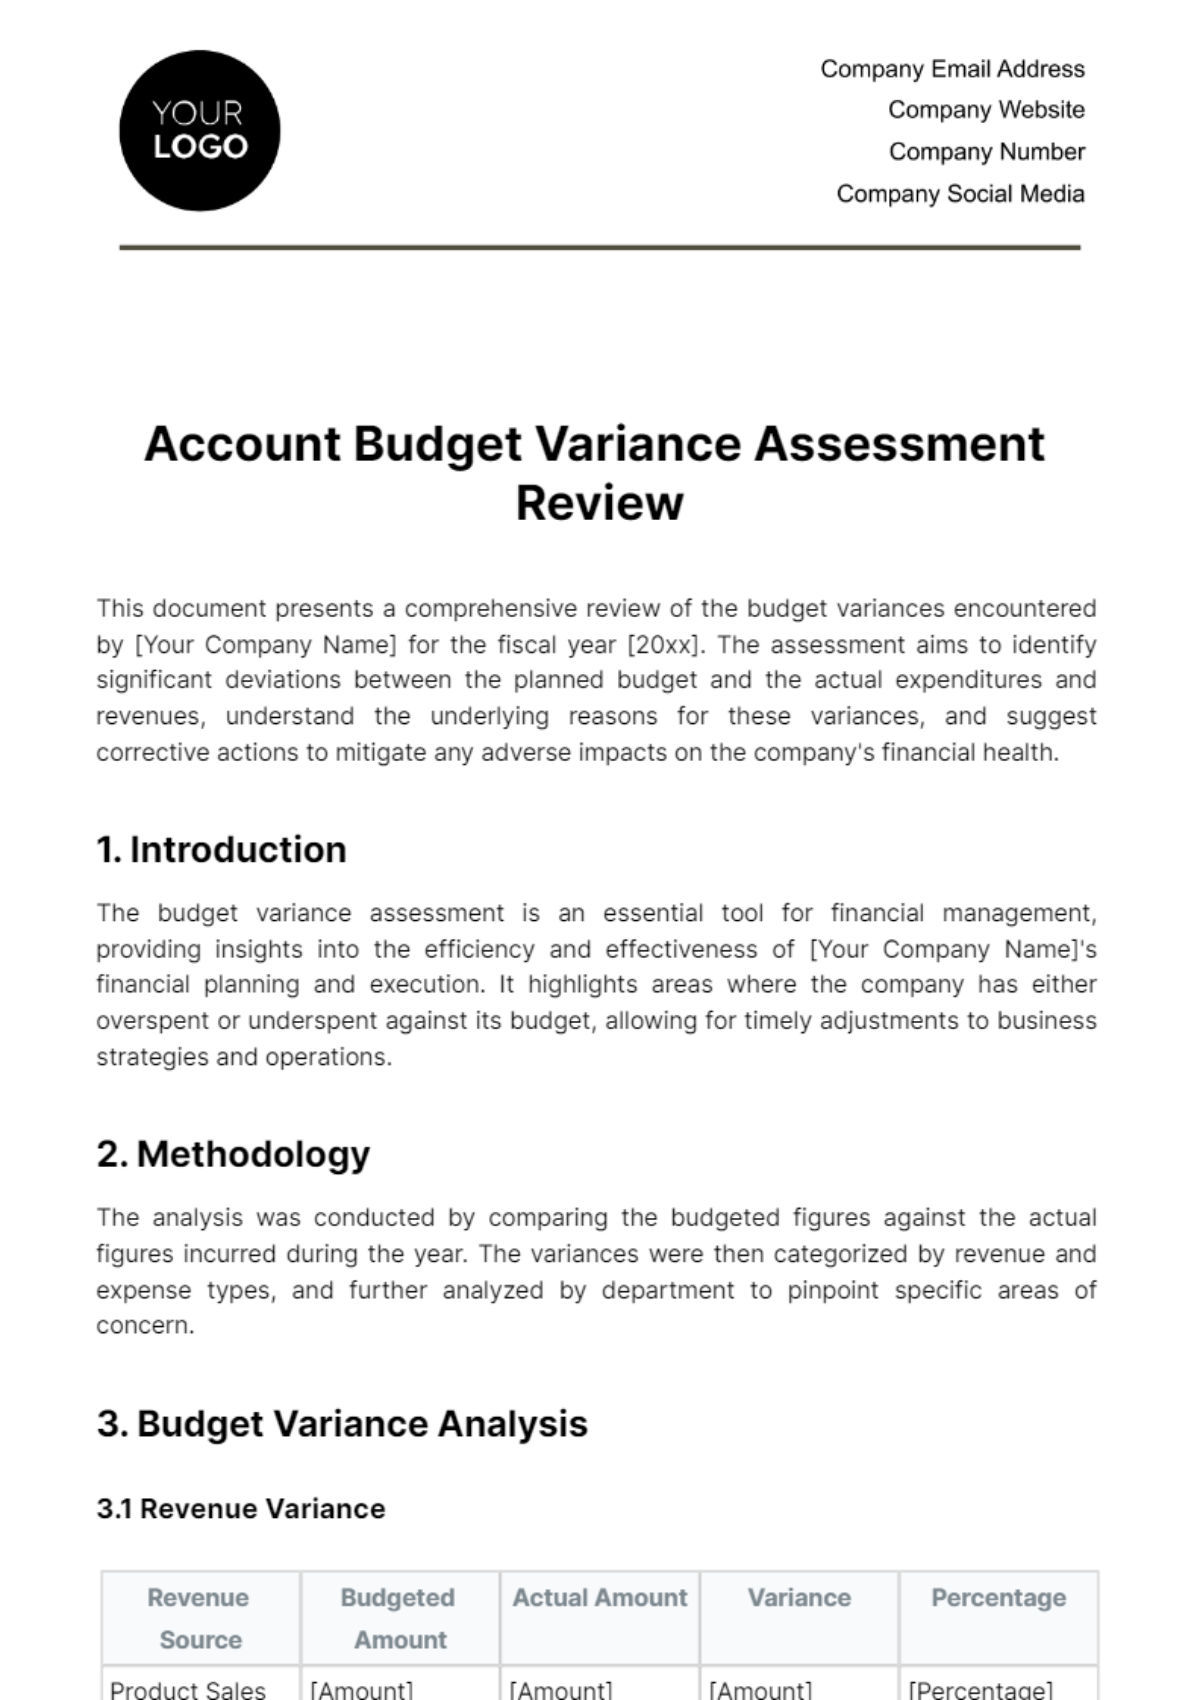 Account Budget Variance Assessment Review Template